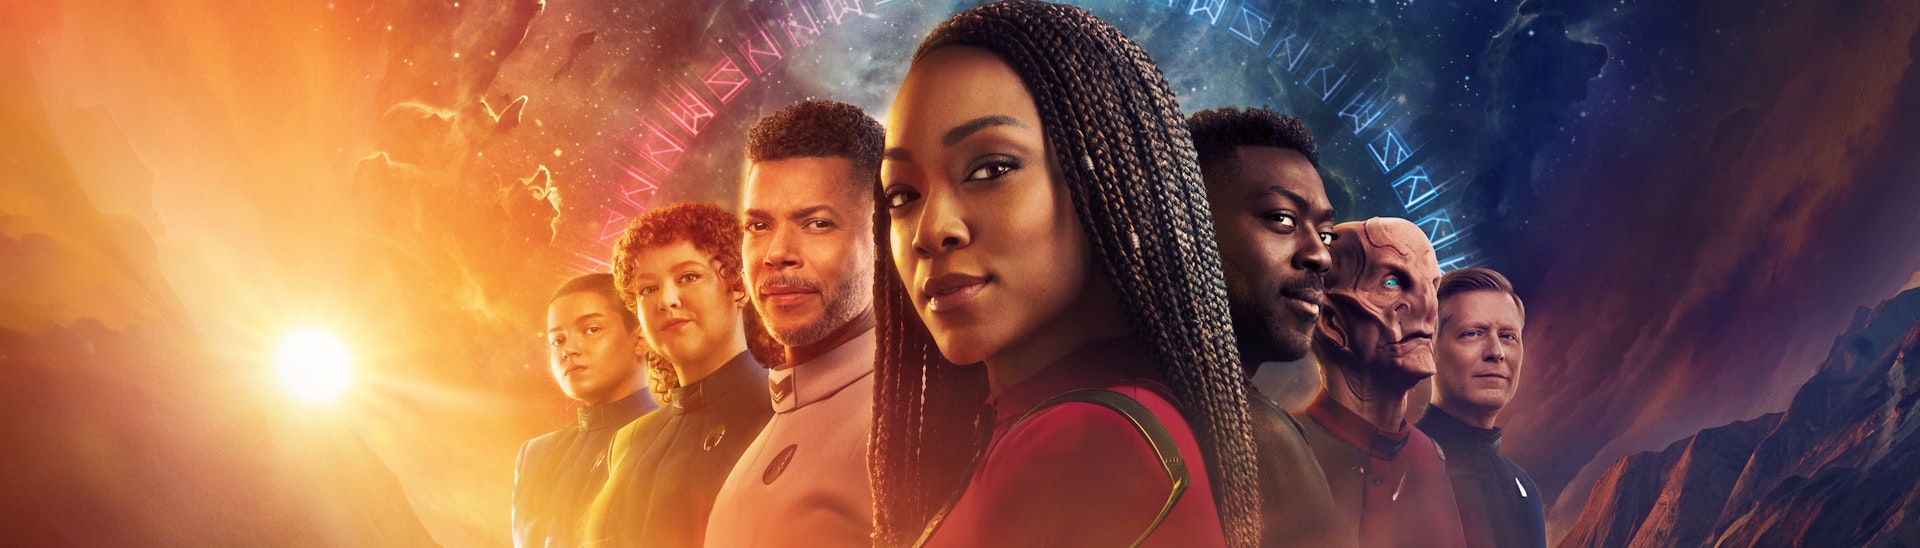 Image of Star Trek: Discovery